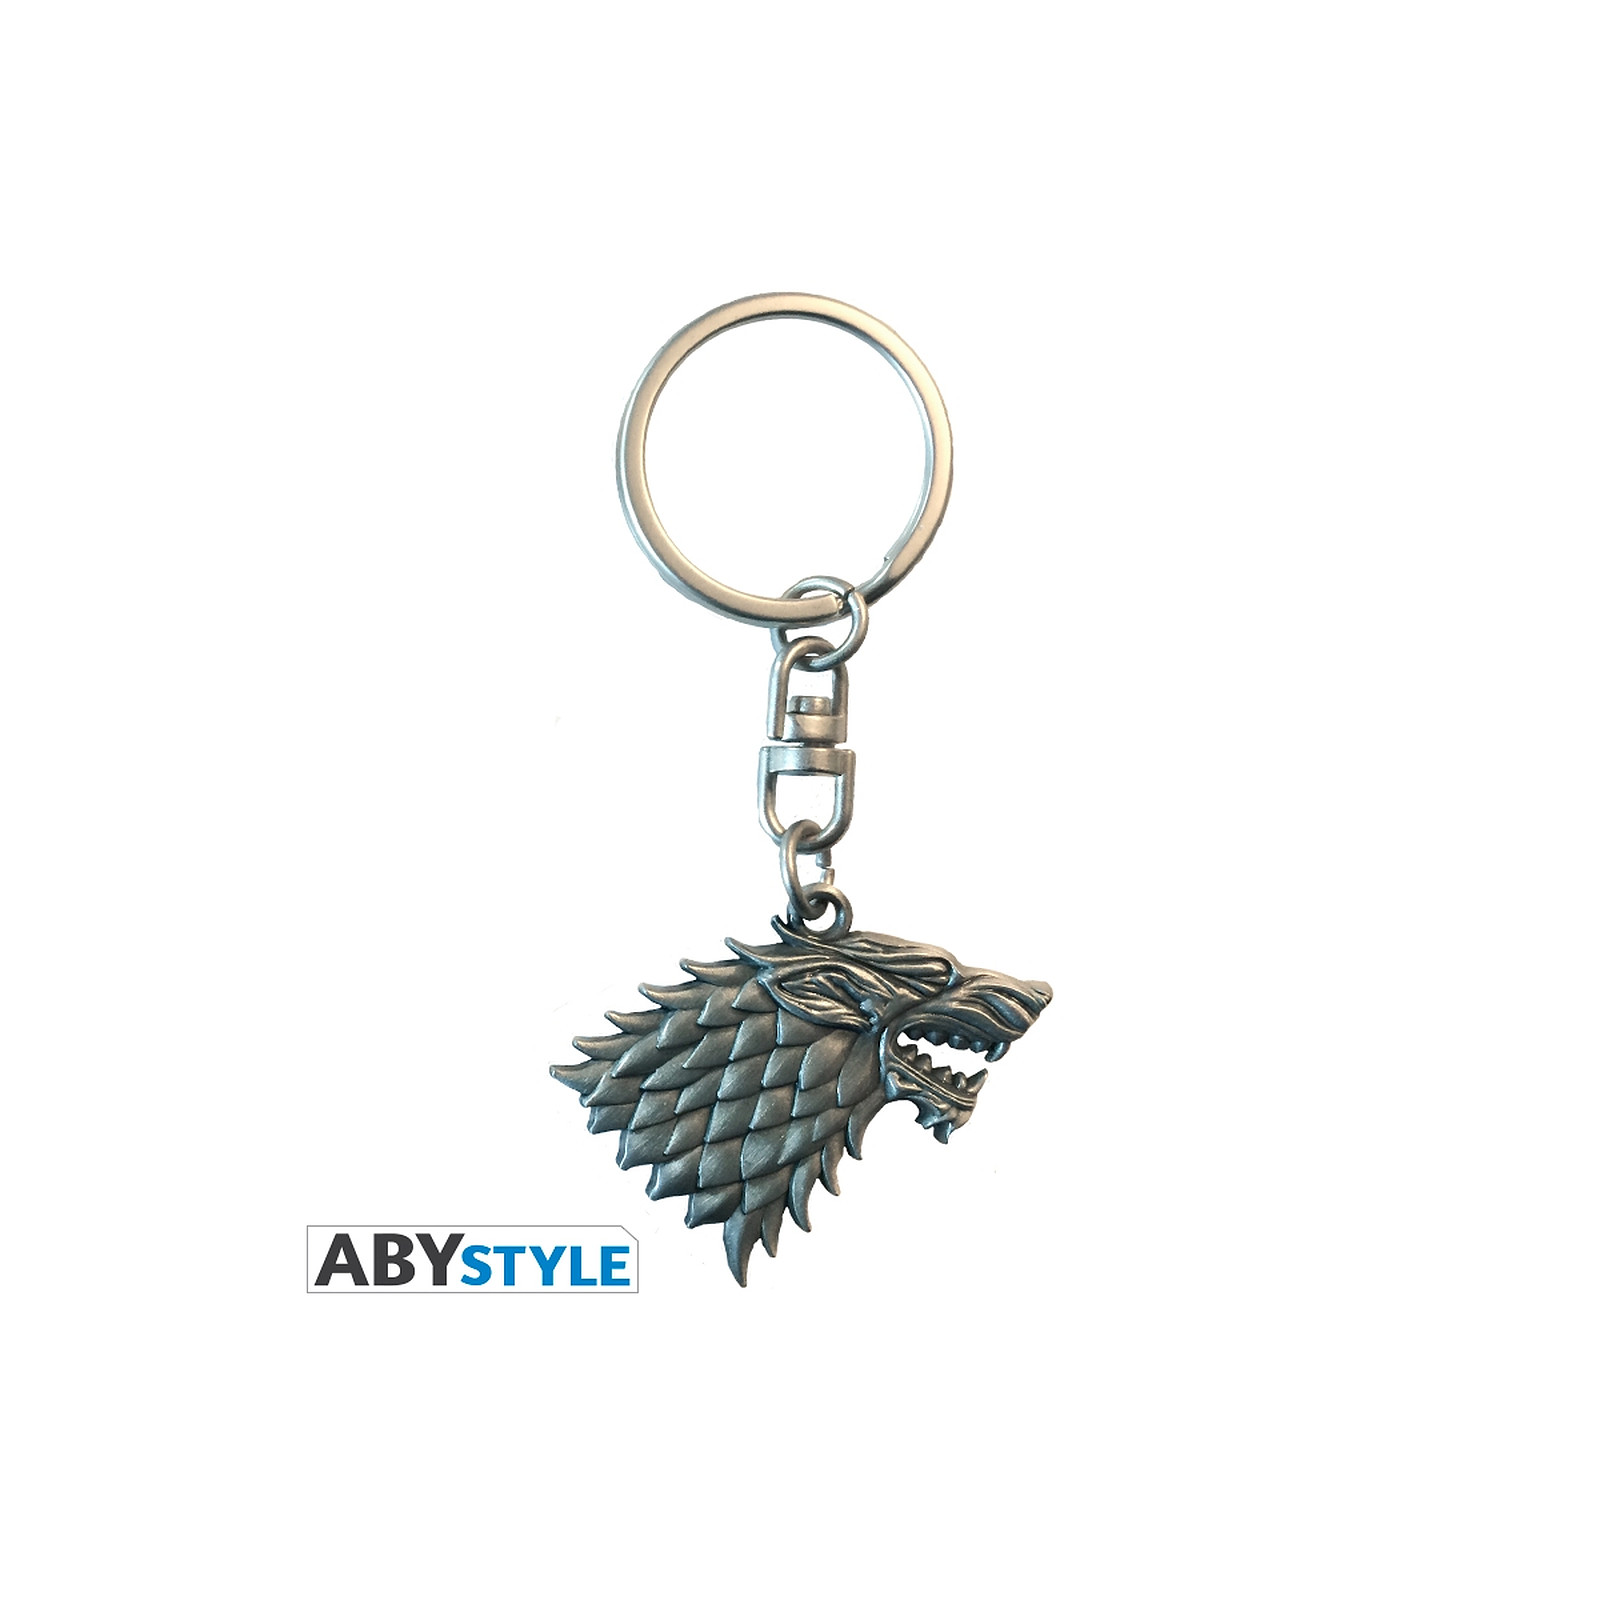 Game Of Thrones - Porte-cles 3D Stark - Porte-cles Abystyle